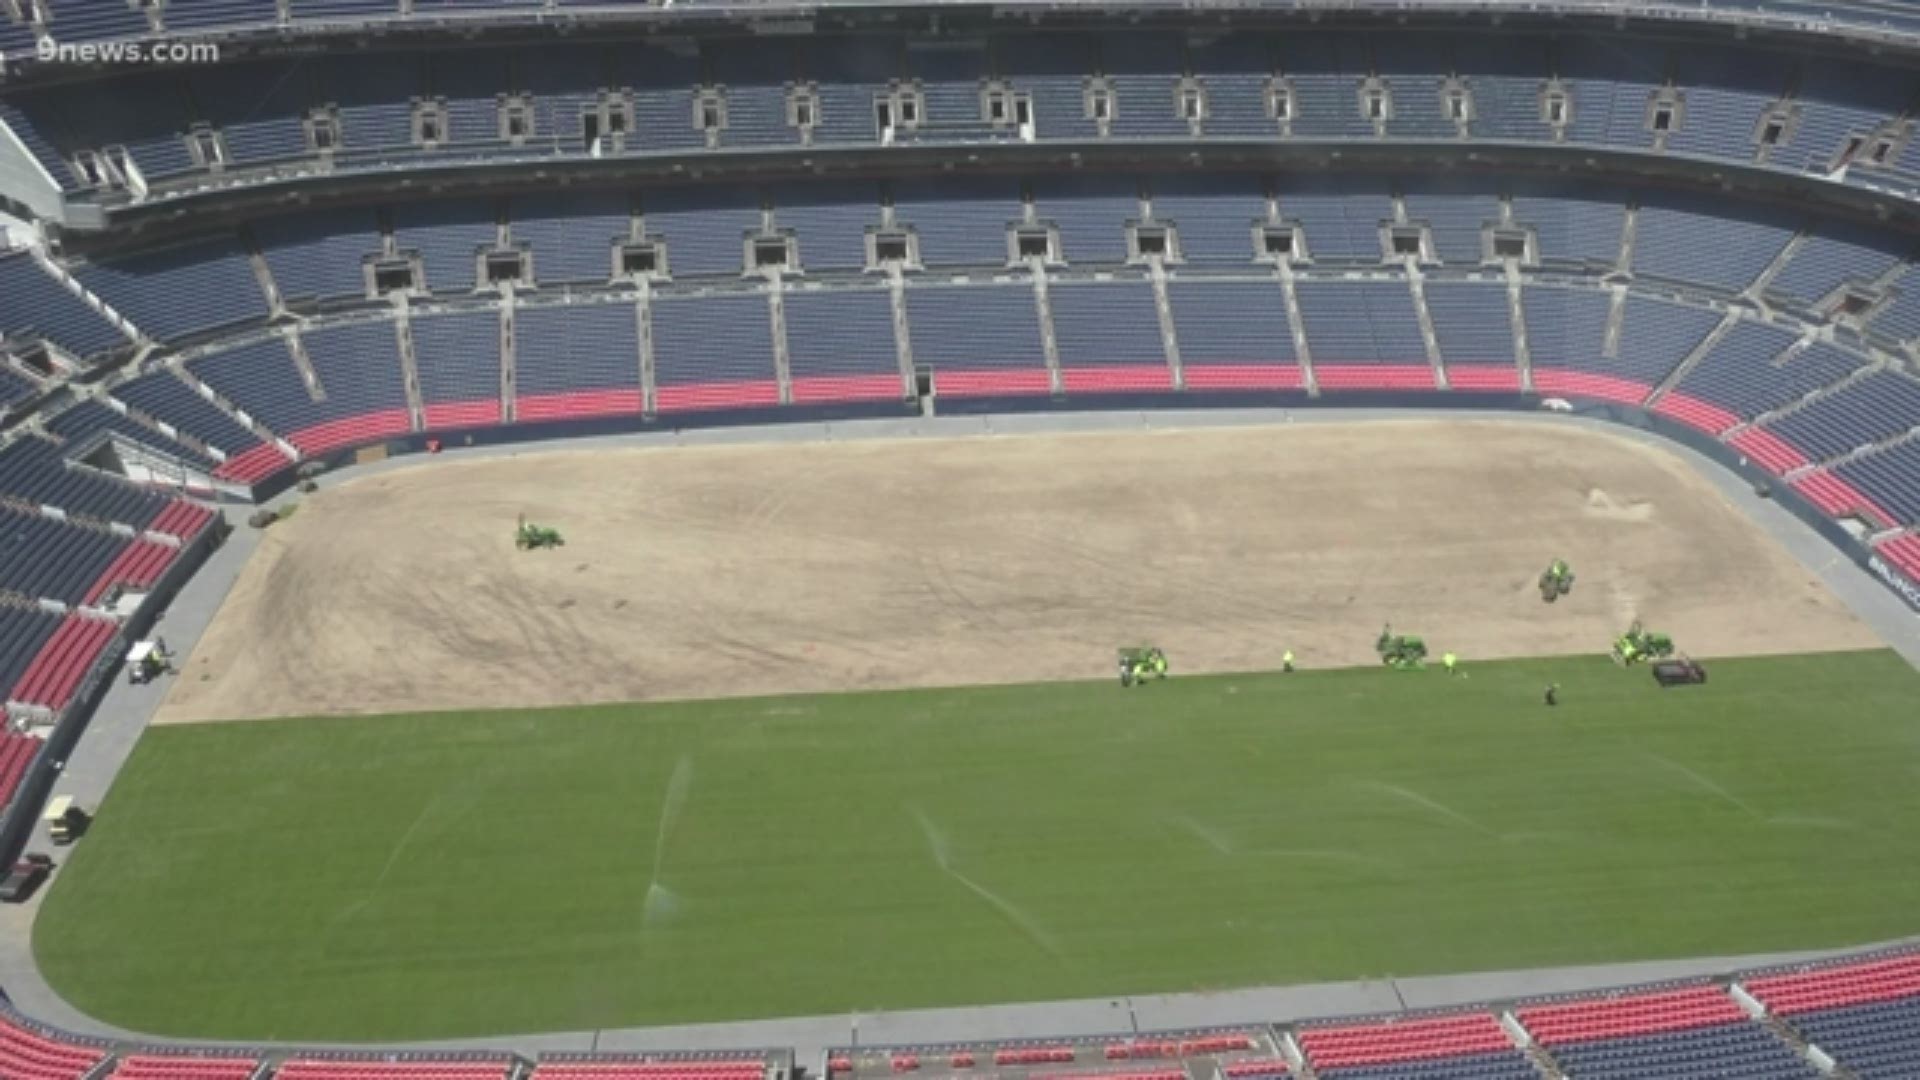 After a football offseason filled with monster trucks, motocross and Garth Brooks, crews on June 12 replaced the turf at Denver's Broncos Stadium at Mile High for the CONCACAF Gold Cup soccer matches on Wednesday, June 19, 2019.